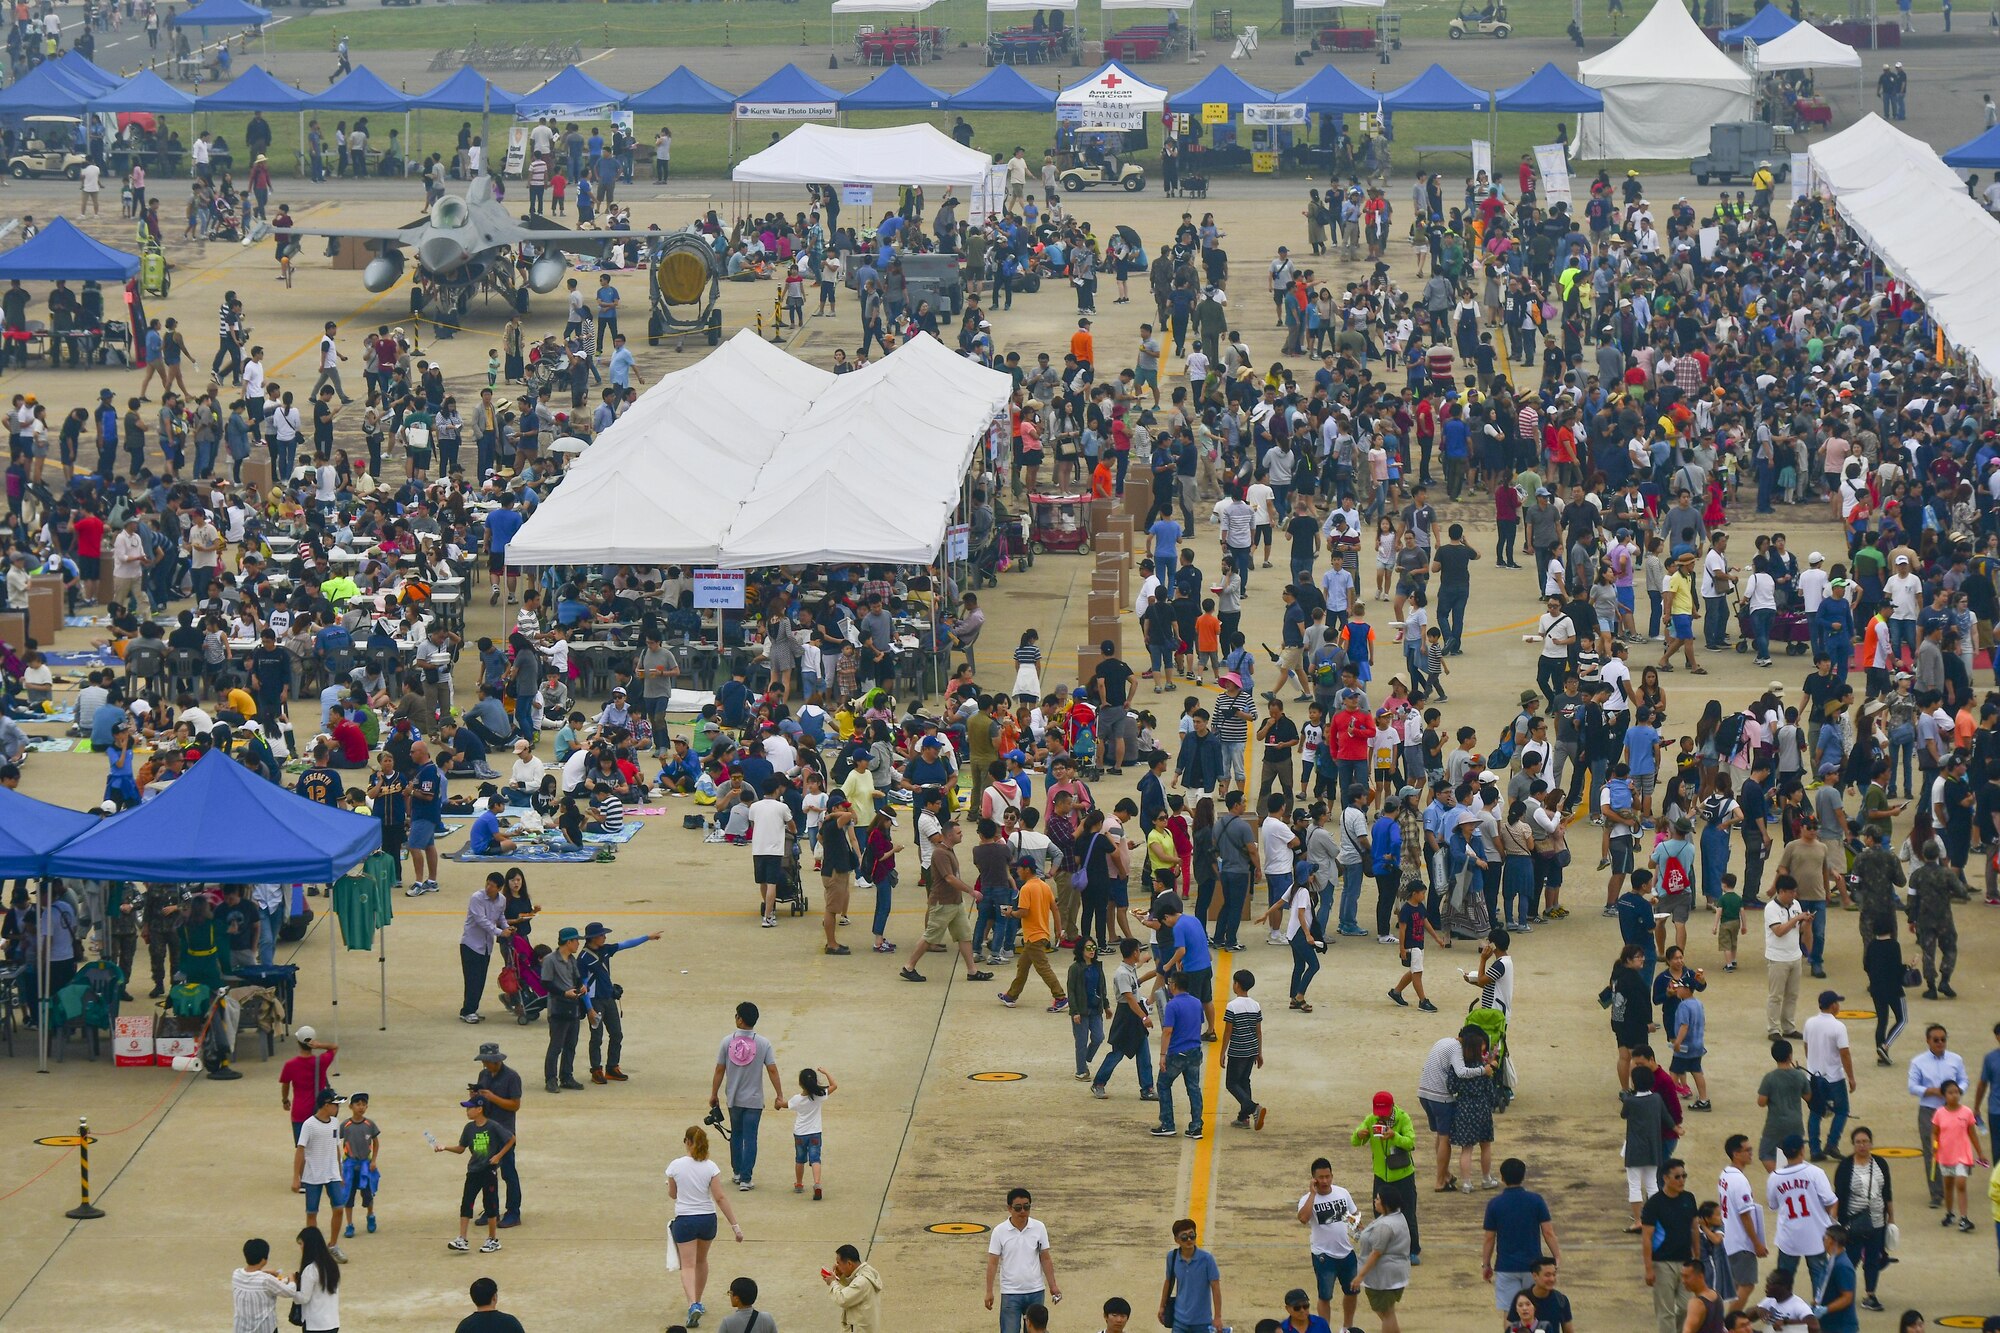 Tens of thousands of people attend Air Power Day 2016 at Osan Air Base, Republic of Korea, Sept. 25, 2016. The air show, which is the first in four years, featured aerial performances from American and ROK acts, music performances from bands including Sublime with Rome, and dozens of food and memorabilia vendors. (U.S. Air Force photo by Senior Airman Victor J. Caputo)